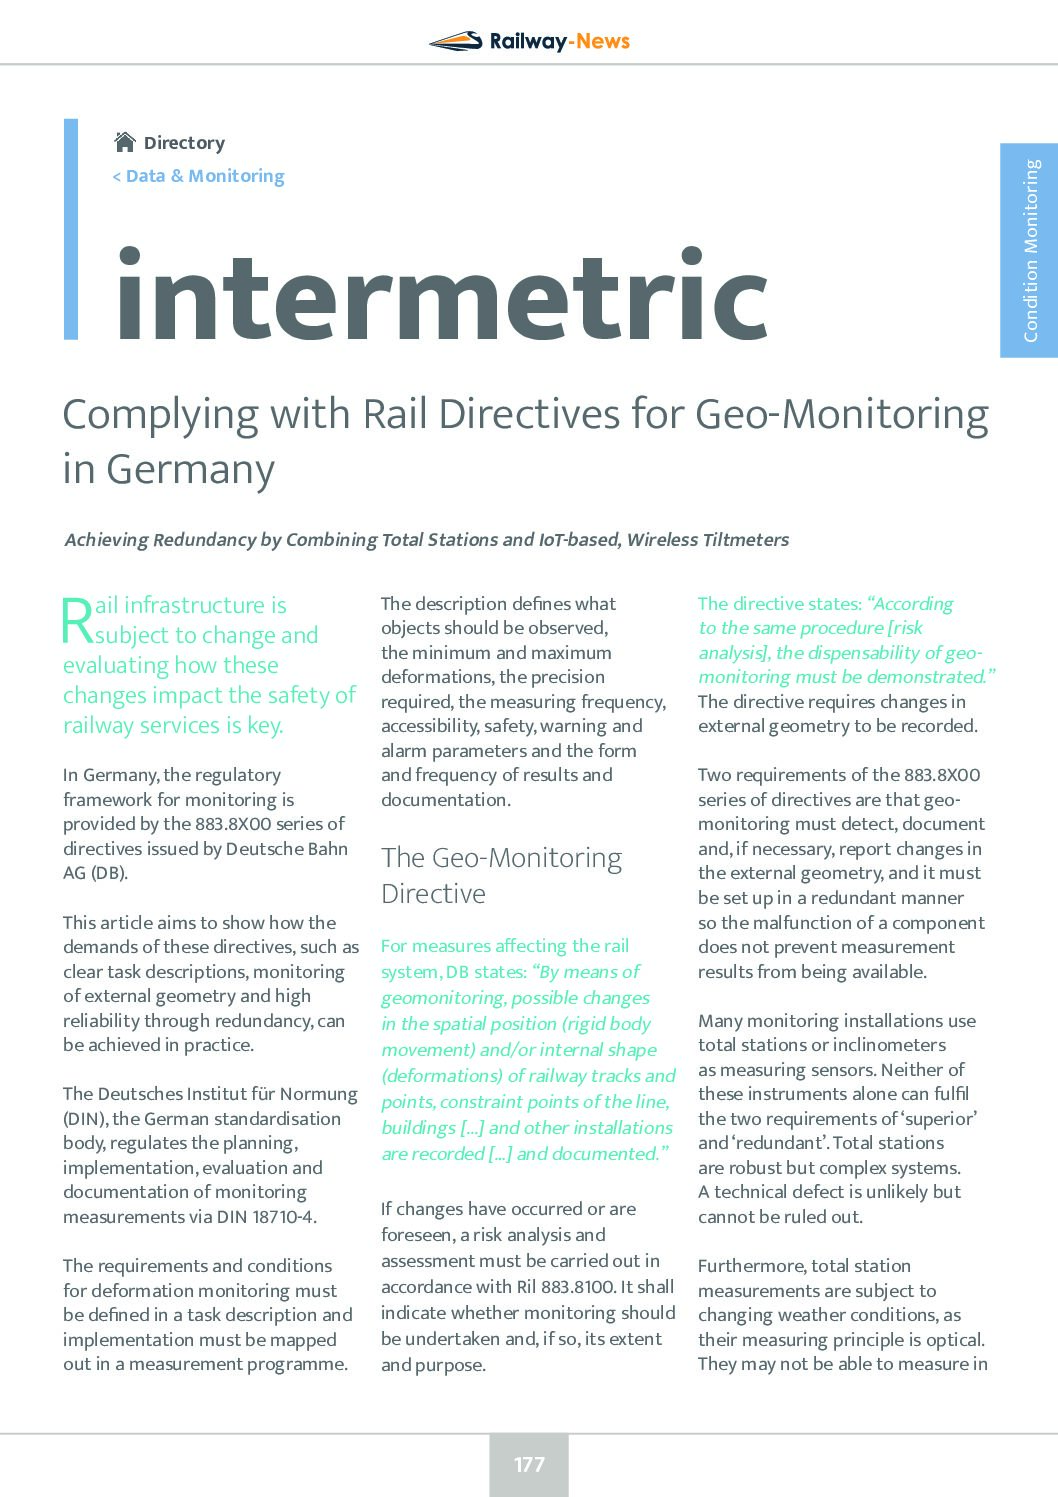 Complying with Rail Directives for Geo-Monitoring in Germany